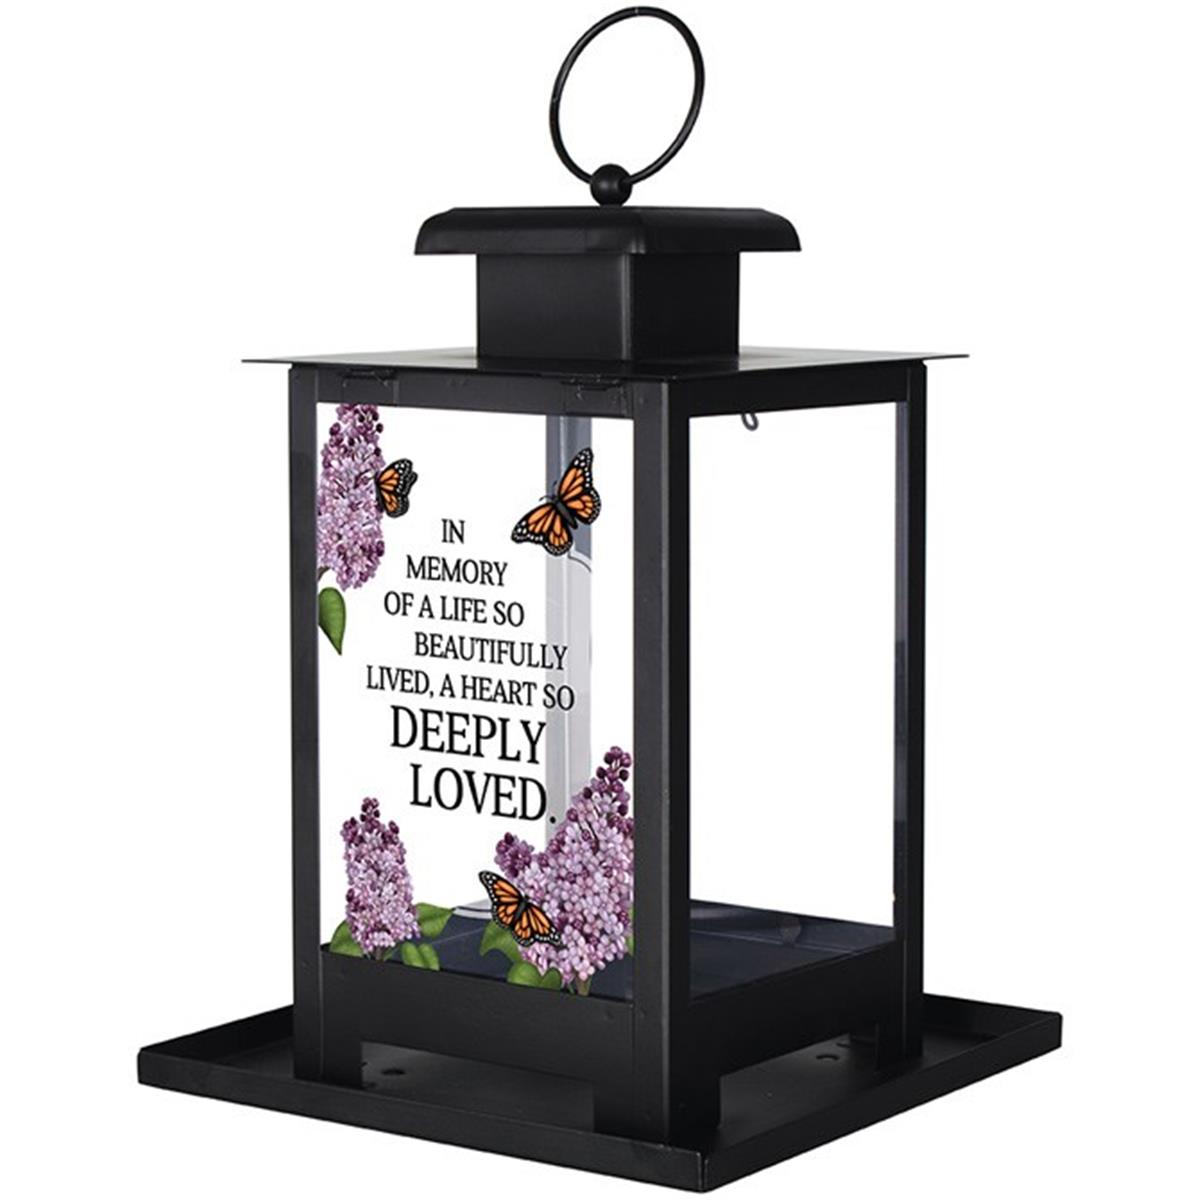 Picture of Carson Home Accents 231713 12 x 7 x 7 in. Deeply Loved Bird Feeder